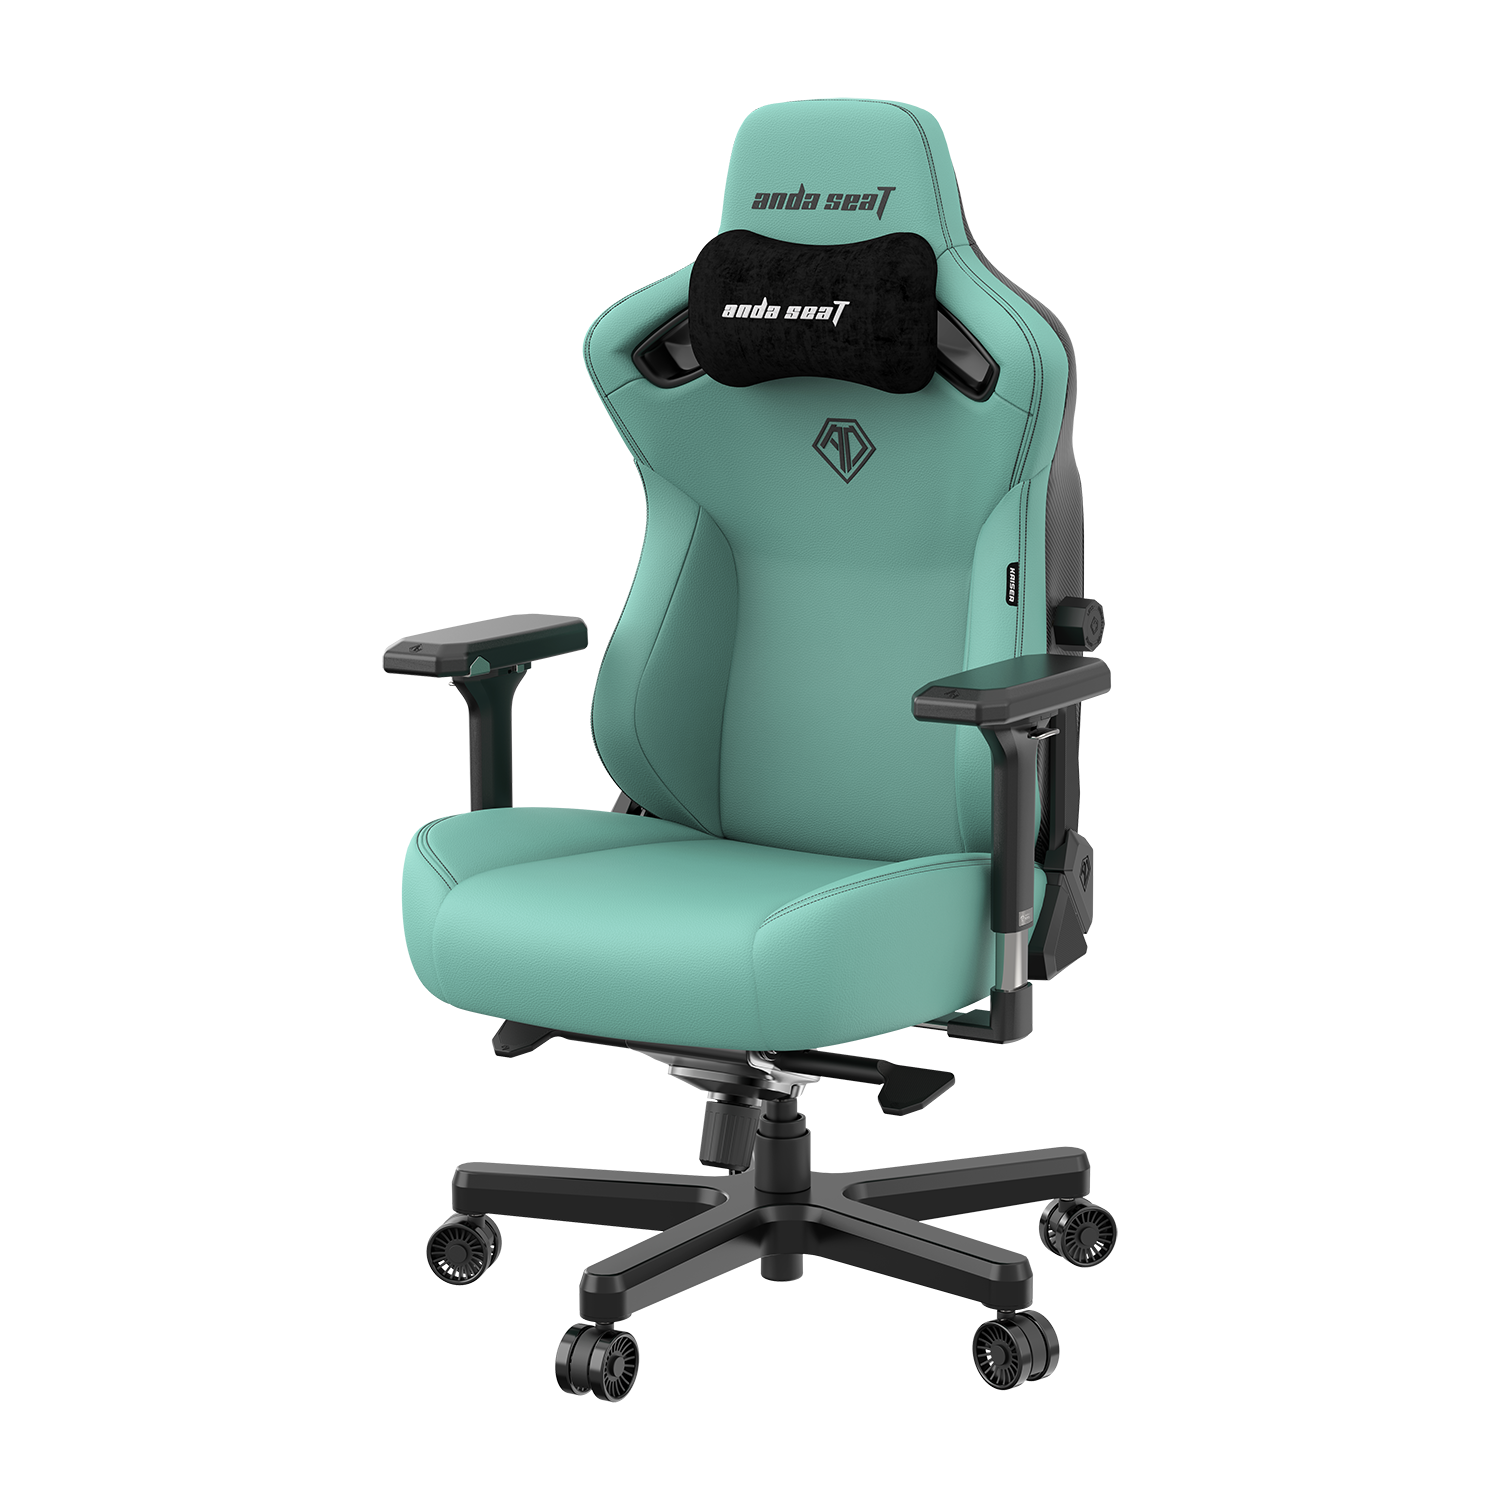 ANDASEAT KAISER 3 L SIZE DURAXTRA LEATHERETTE - ROBIN EGG BLUE